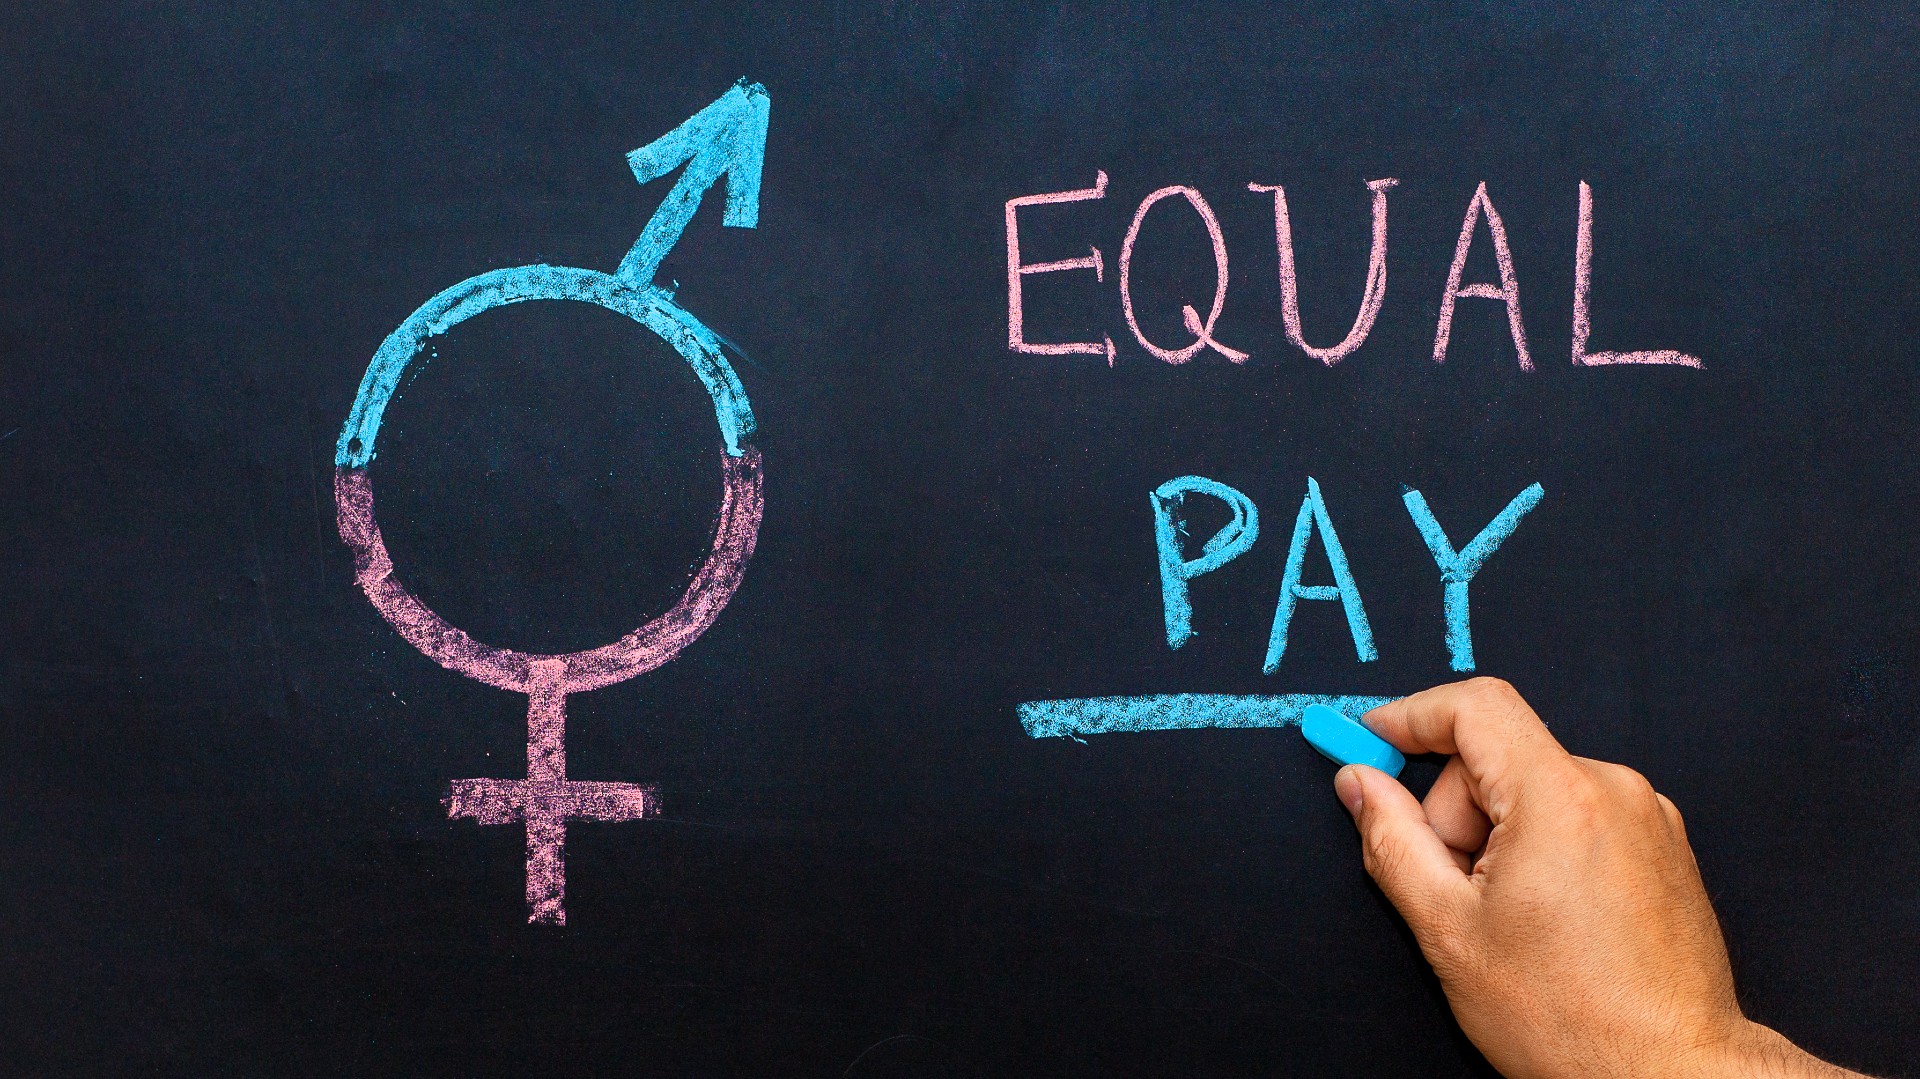 Committee of Ministers : declaration on equal pay and opportunities for women and men